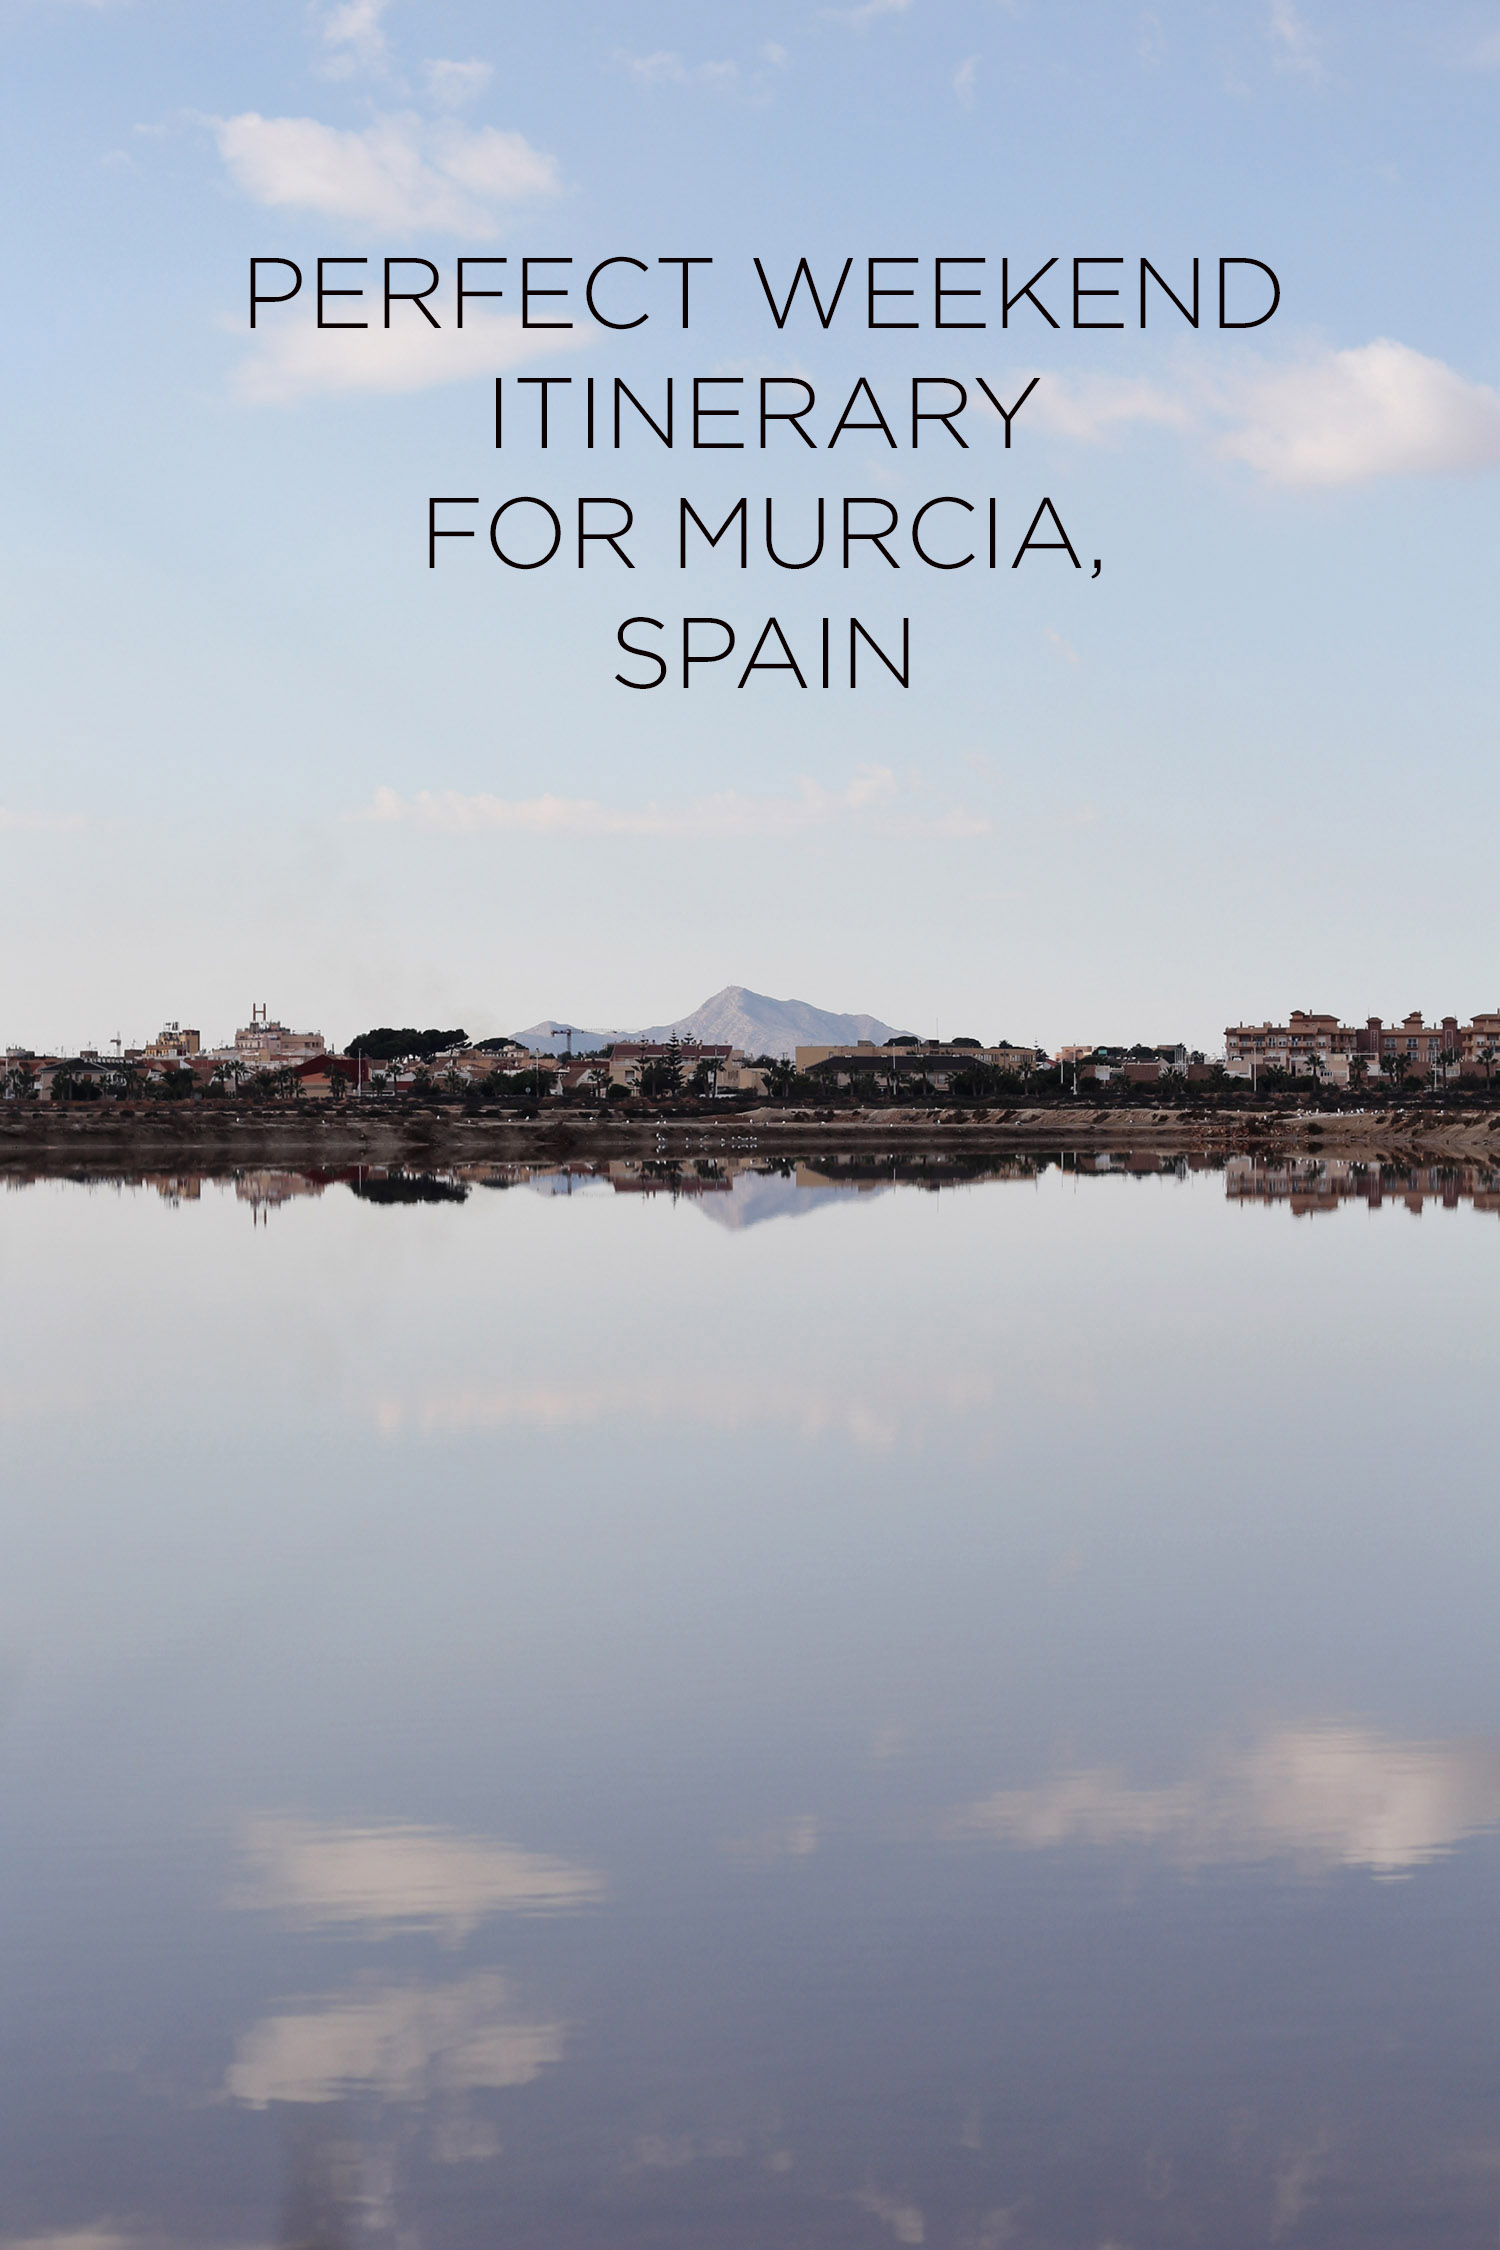 PERFECT WEEKEND ITINERARY FOR MURCIA SPAIN